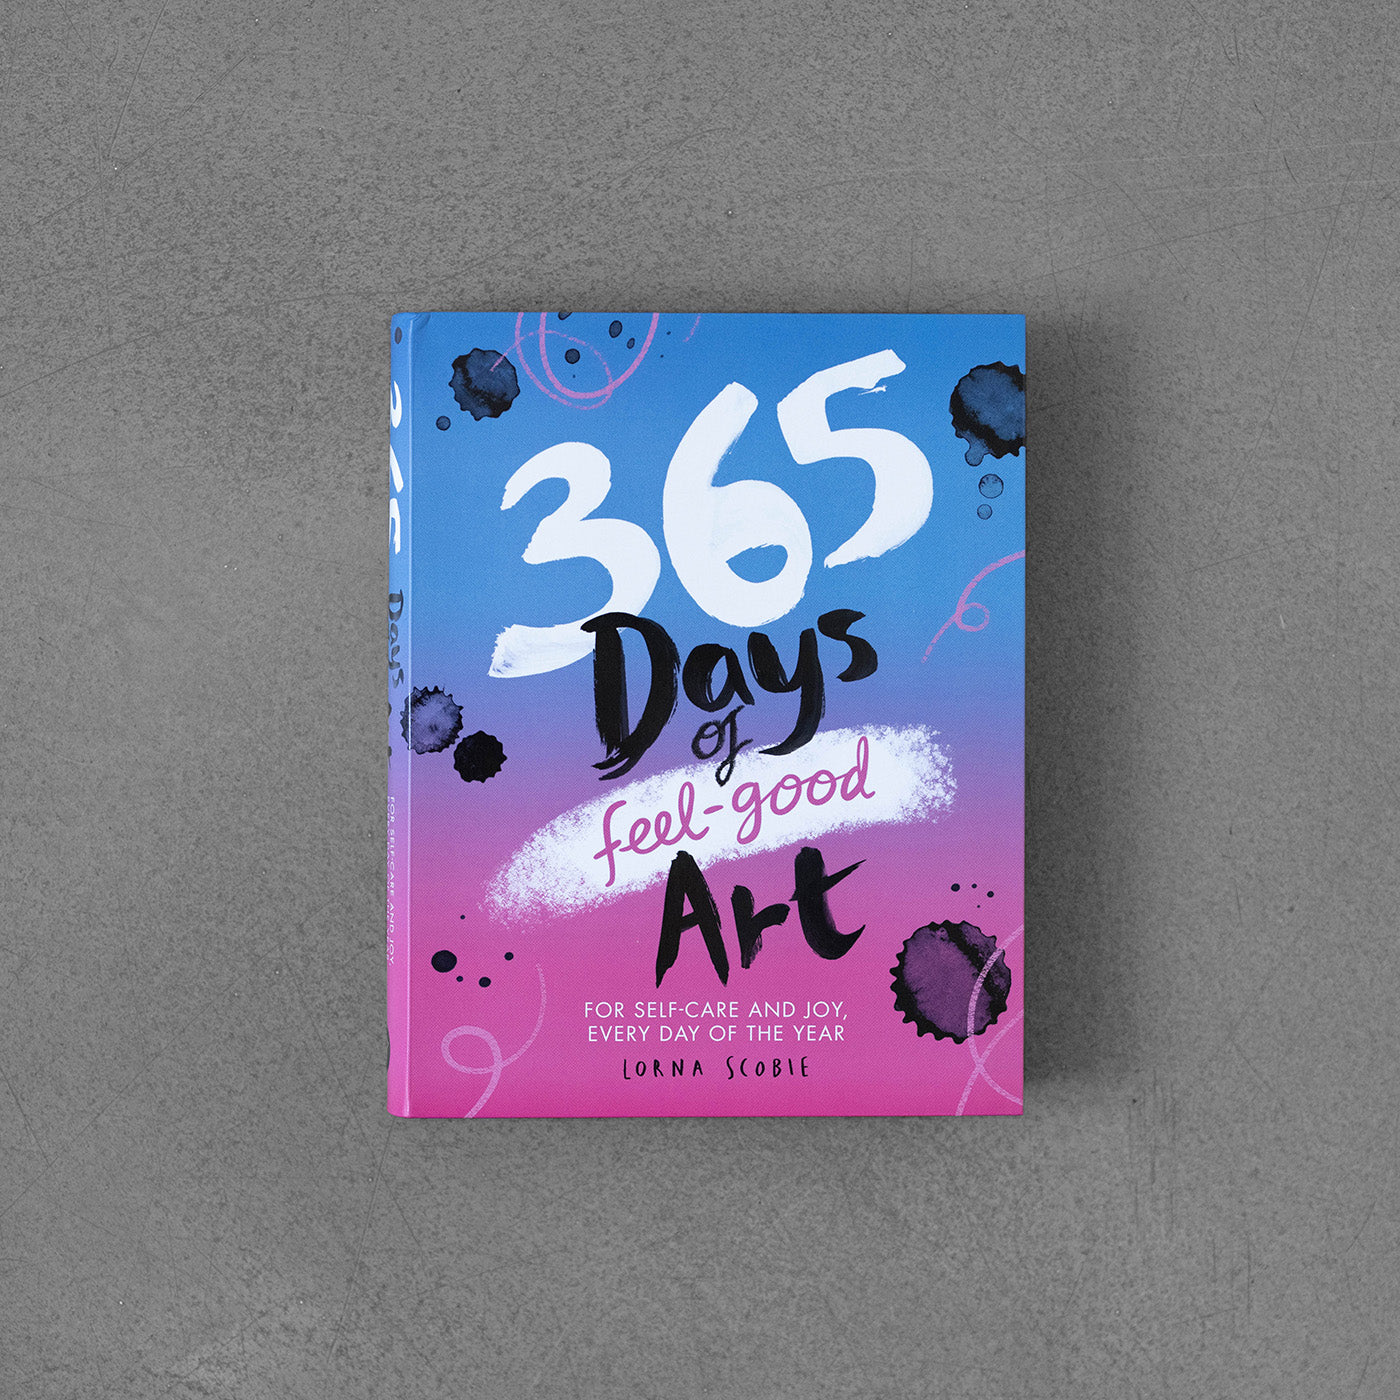 Every　of　Feel-good　Yea　Art:　Joy,　Days　Book　Self-Care　For　Day　365　–　the　of　and　Therapy